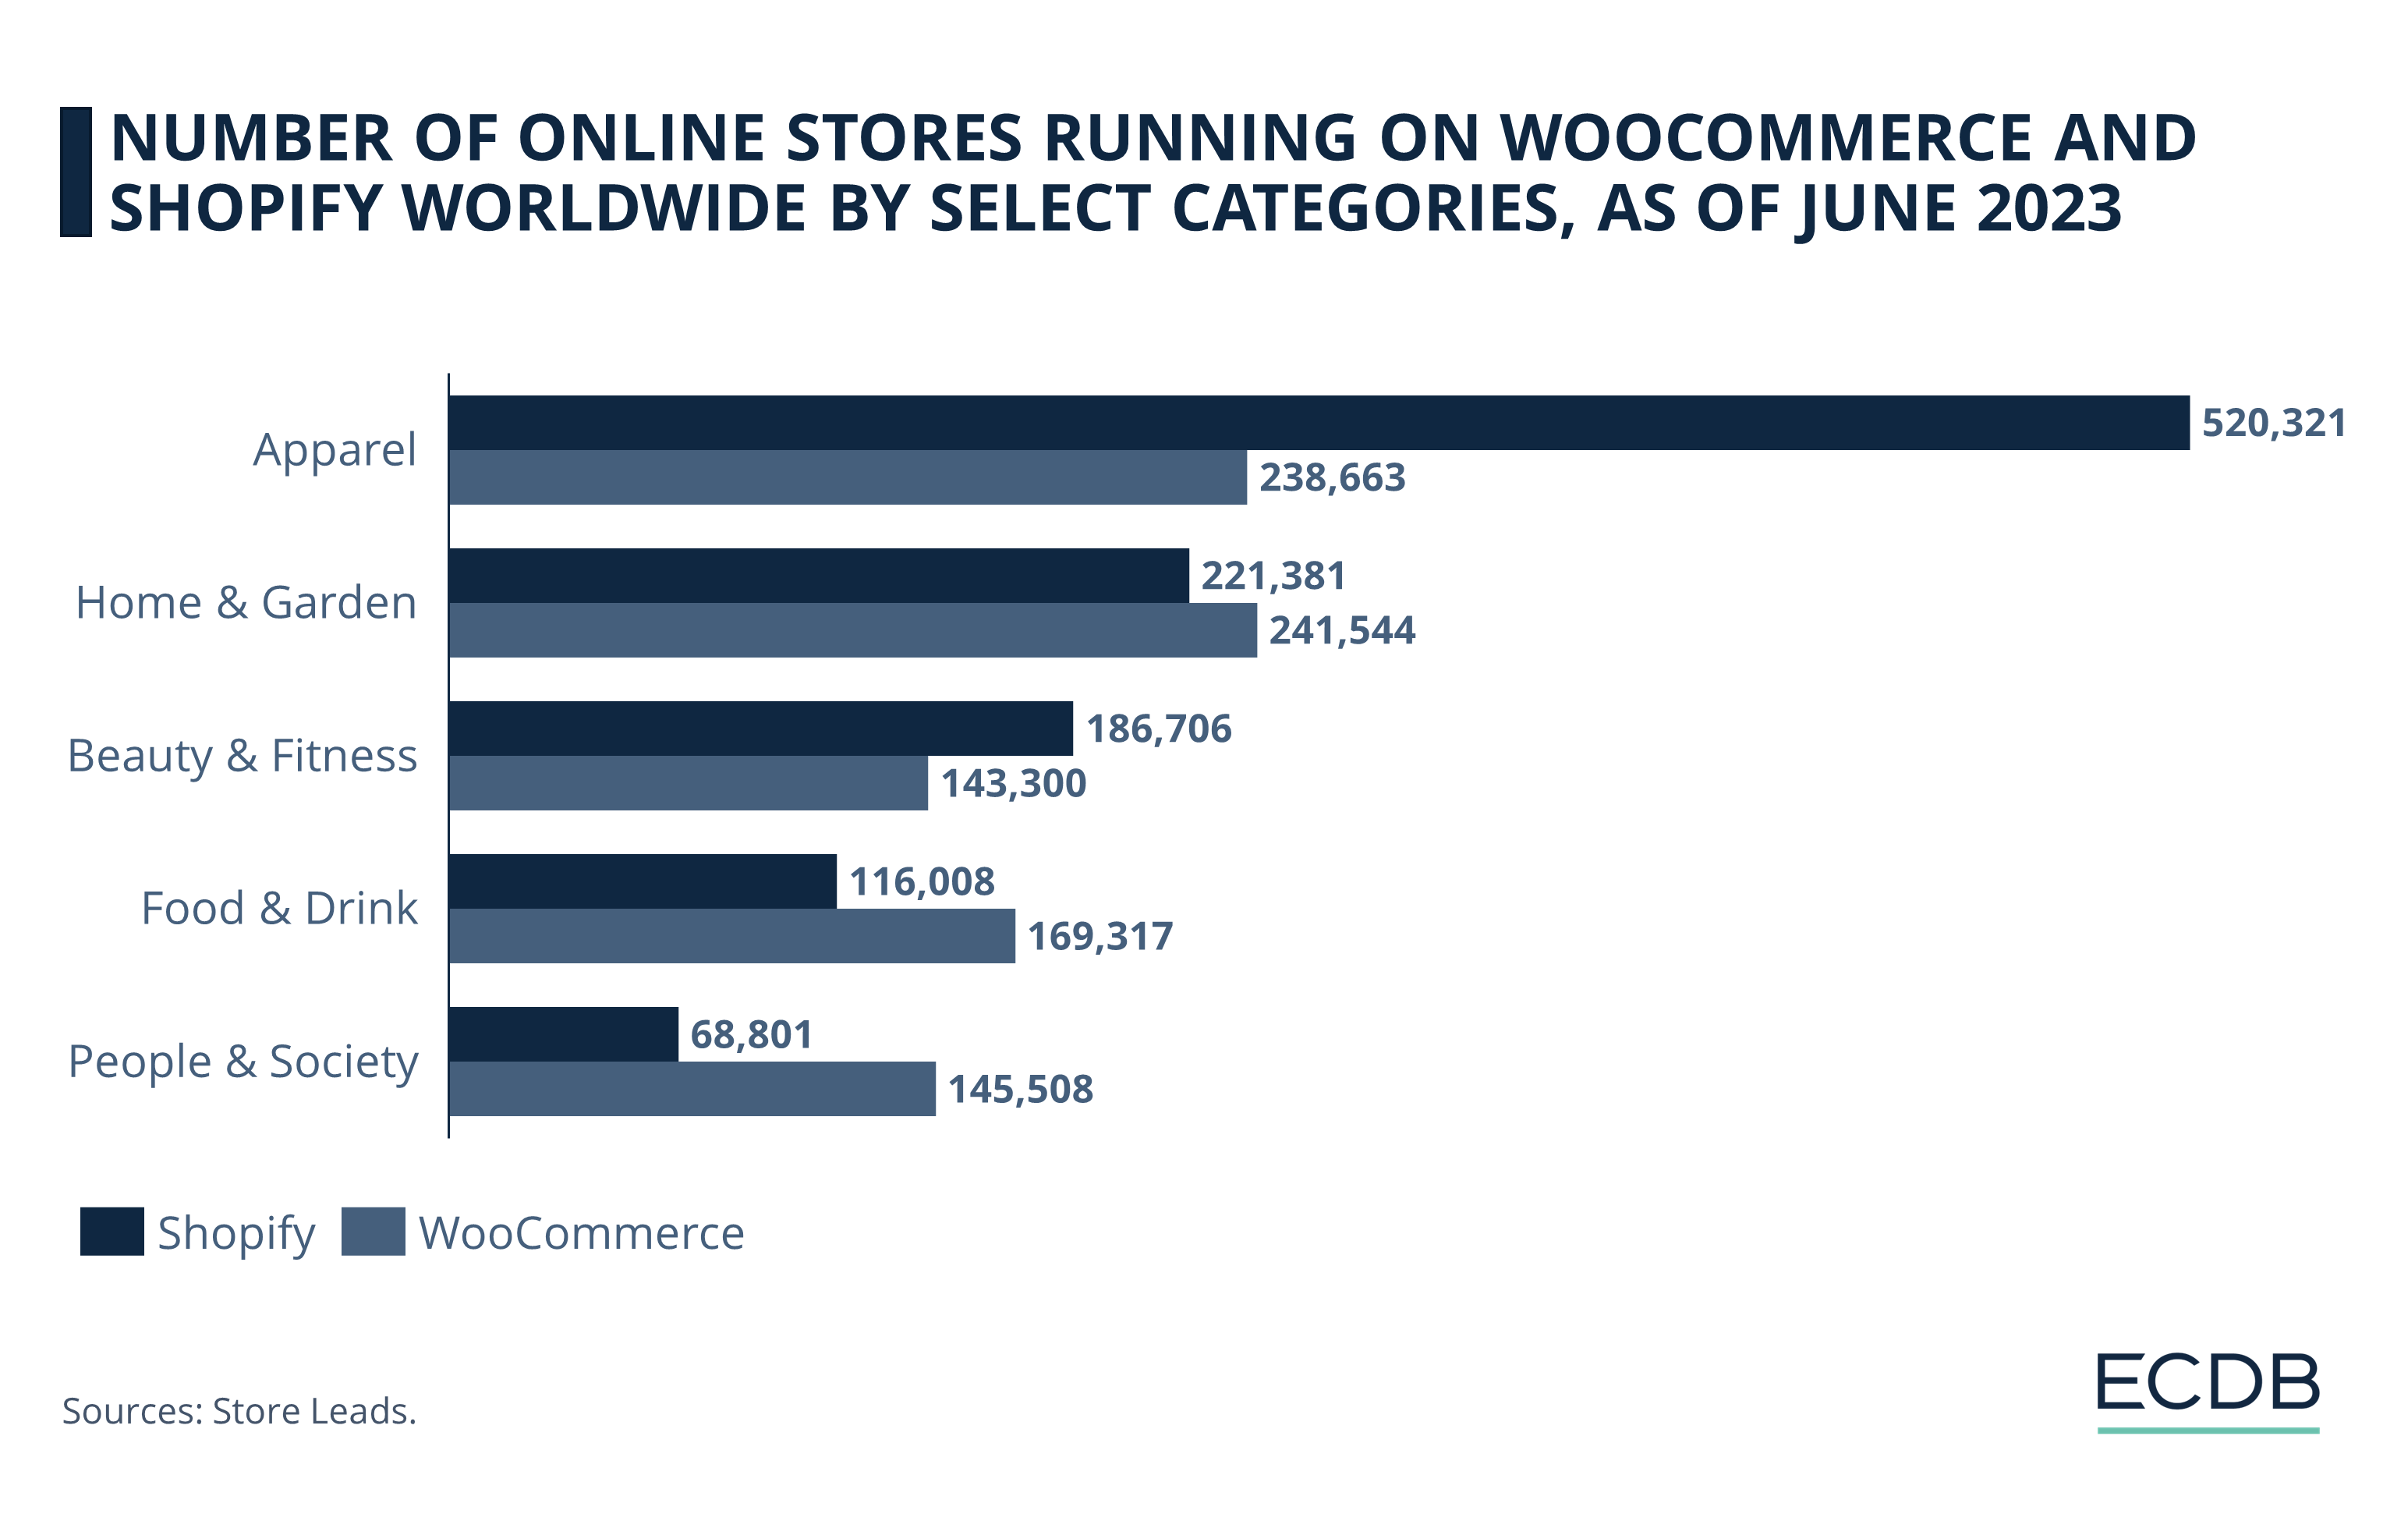 Number of Online Stores Running on WooCommerce and Shopify Worldwide by Select Categories, as of June 2023